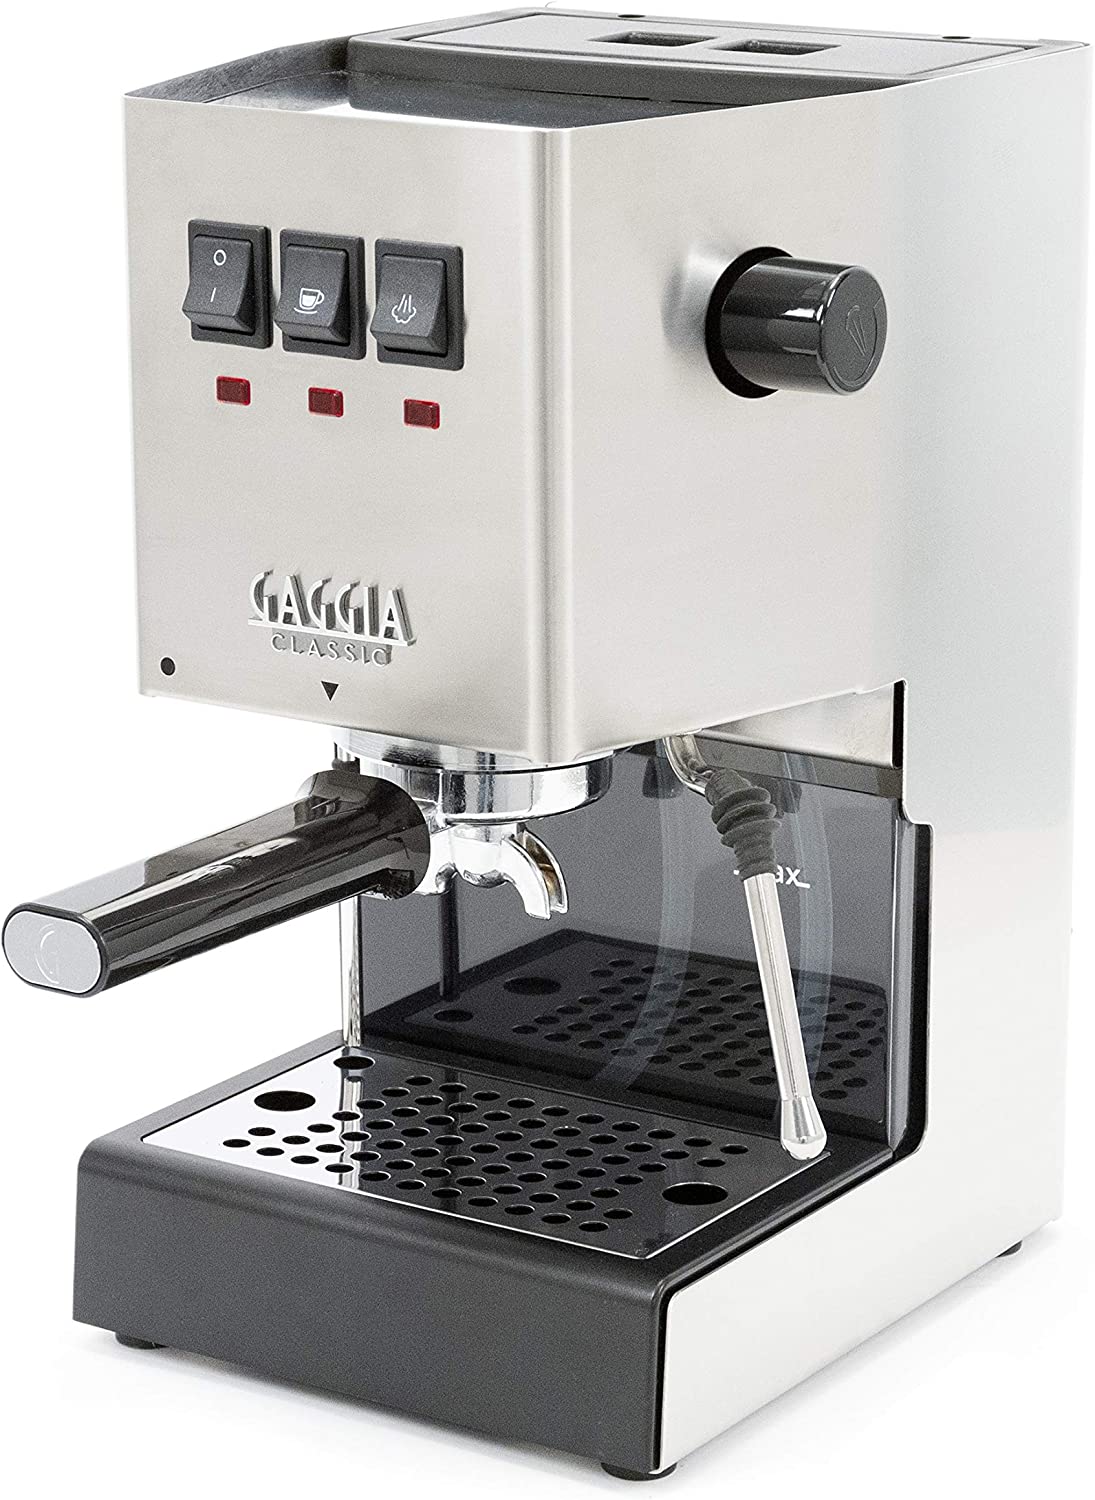 We tested the top 5 espresso machines